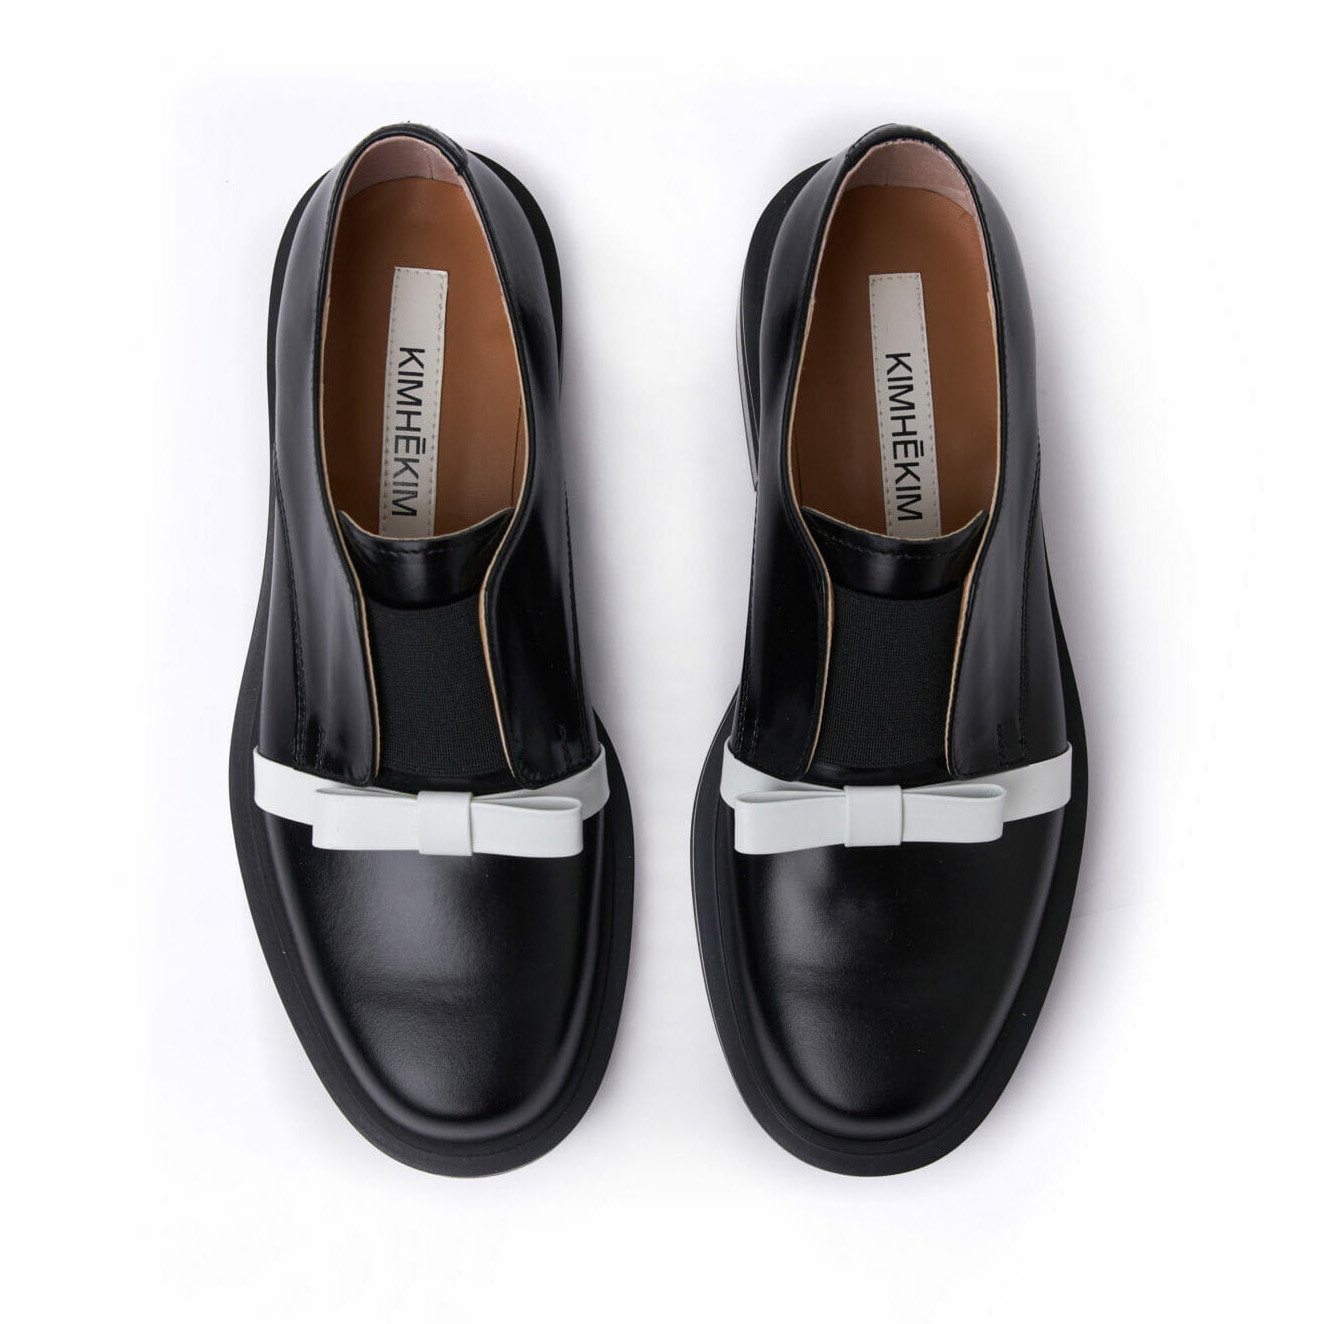 <img class='new_mark_img1' src='https://img.shop-pro.jp/img/new/icons7.gif' style='border:none;display:inline;margin:0px;padding:0px;width:auto;' />KIMHEKIM PEARL GABLIER DERBY SHOES